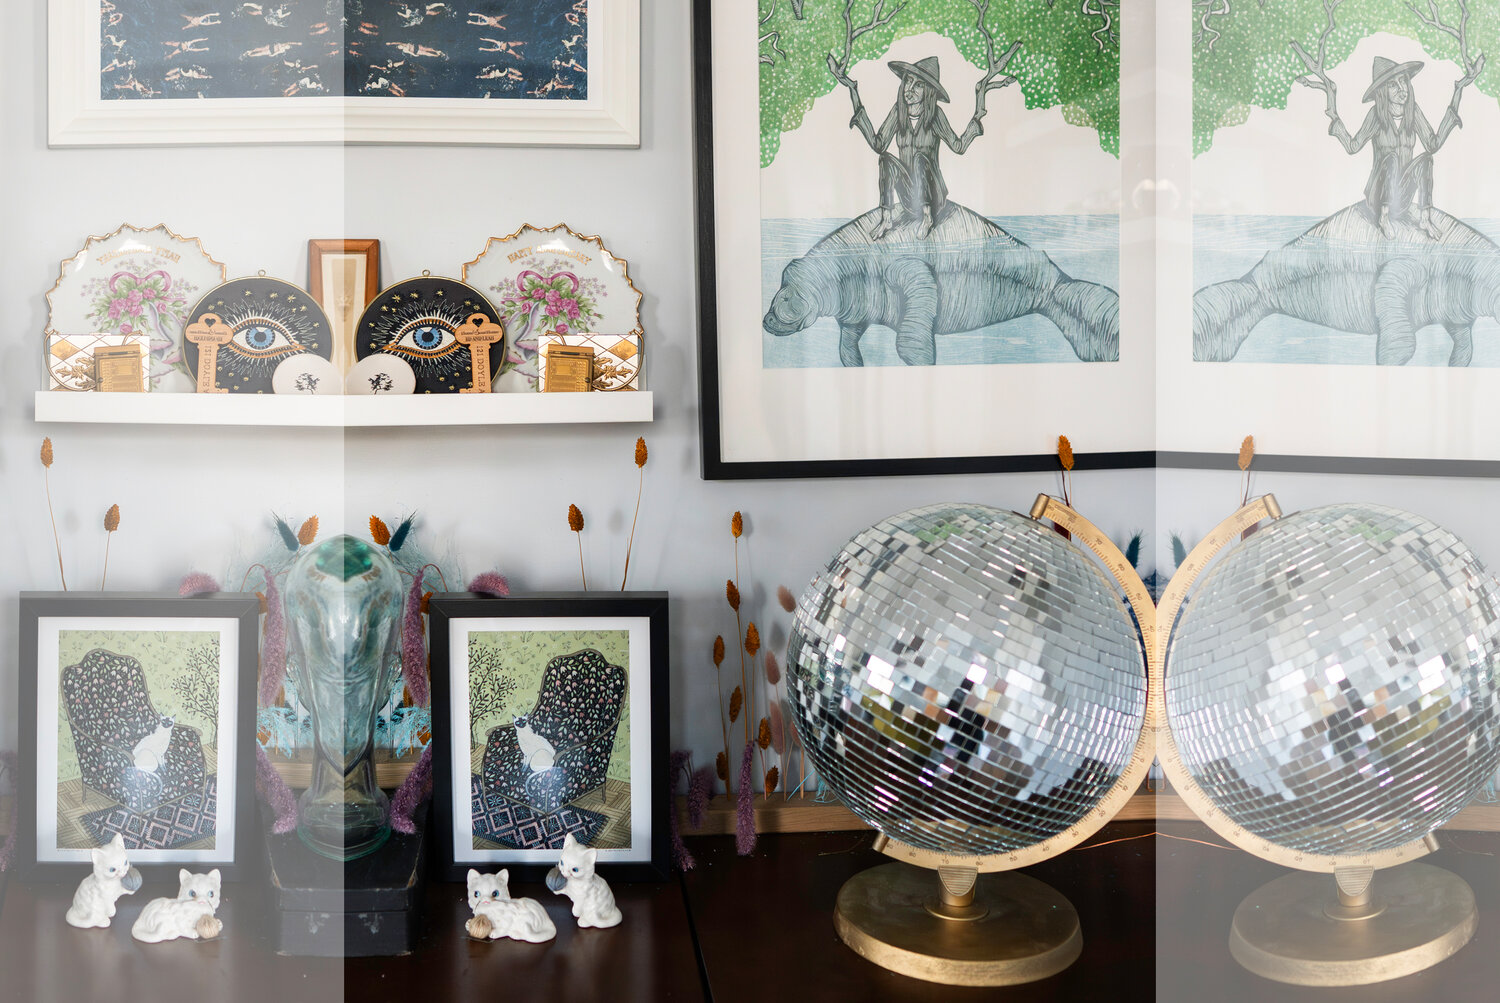 A few decor items from the couple’s wedding have found permanent places, like a disco ball globe Pisari made, and the Rolodex used as a guestbook.